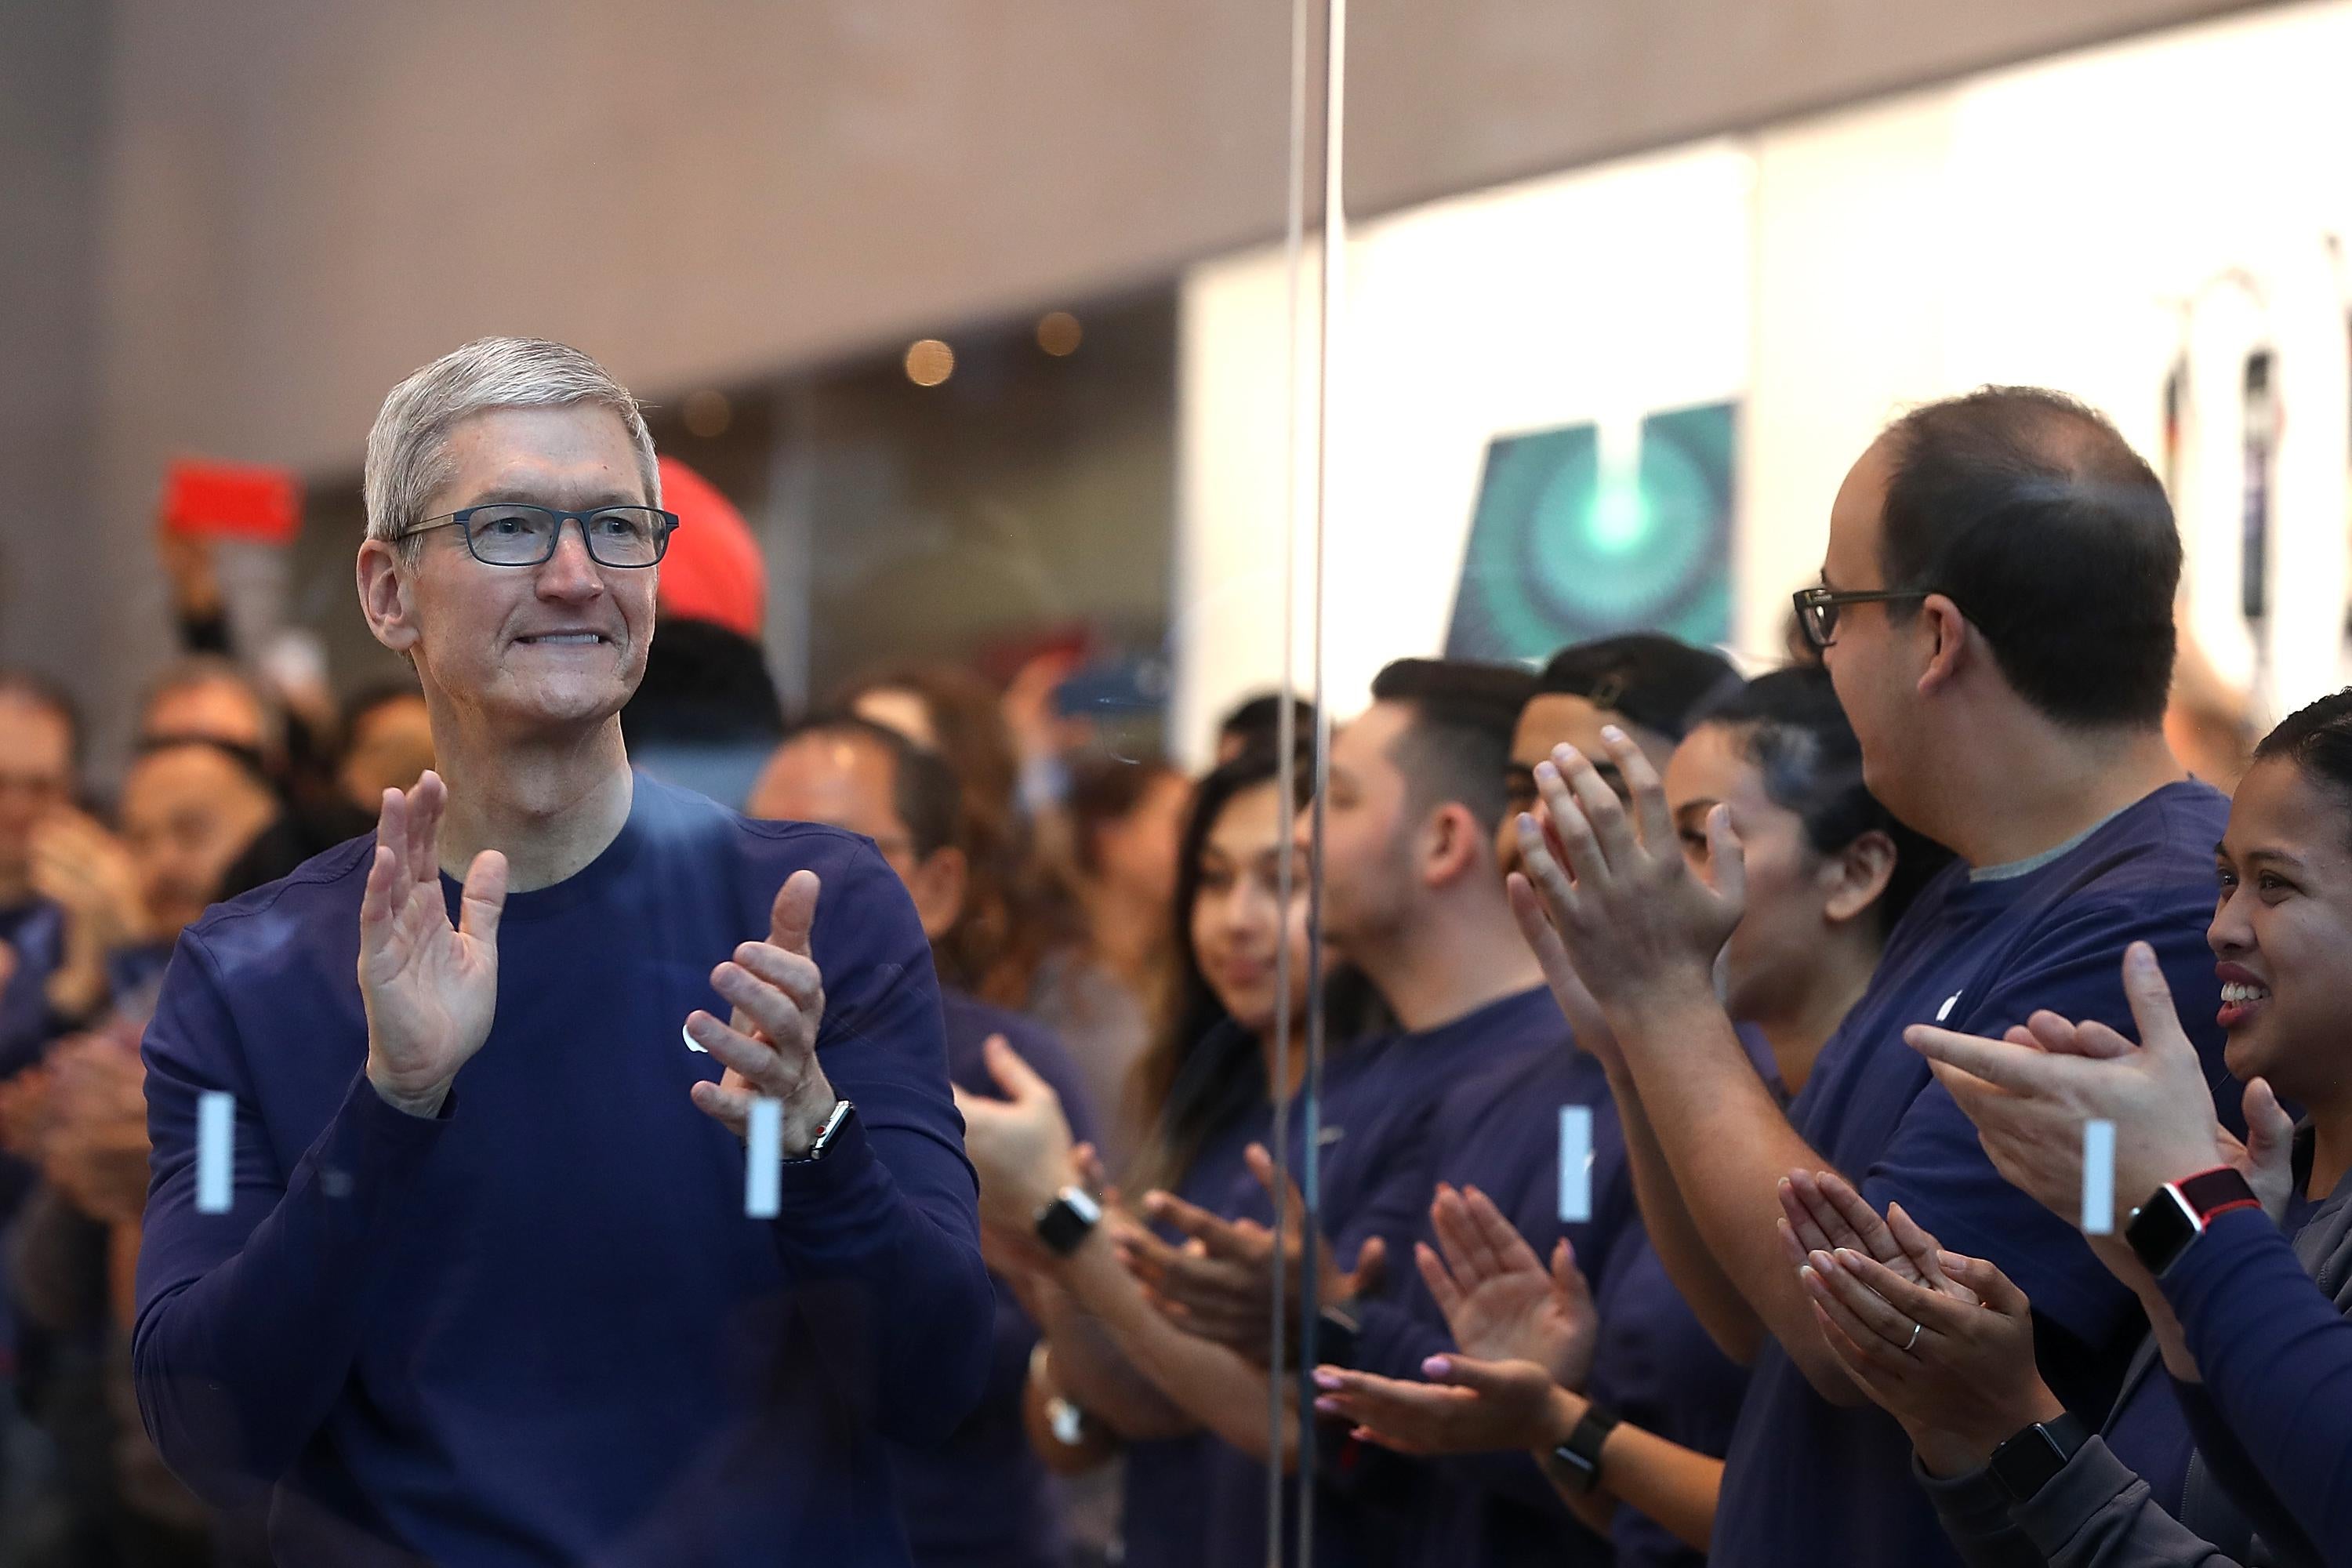 Tim Cook and others applaud inside an Apple store.